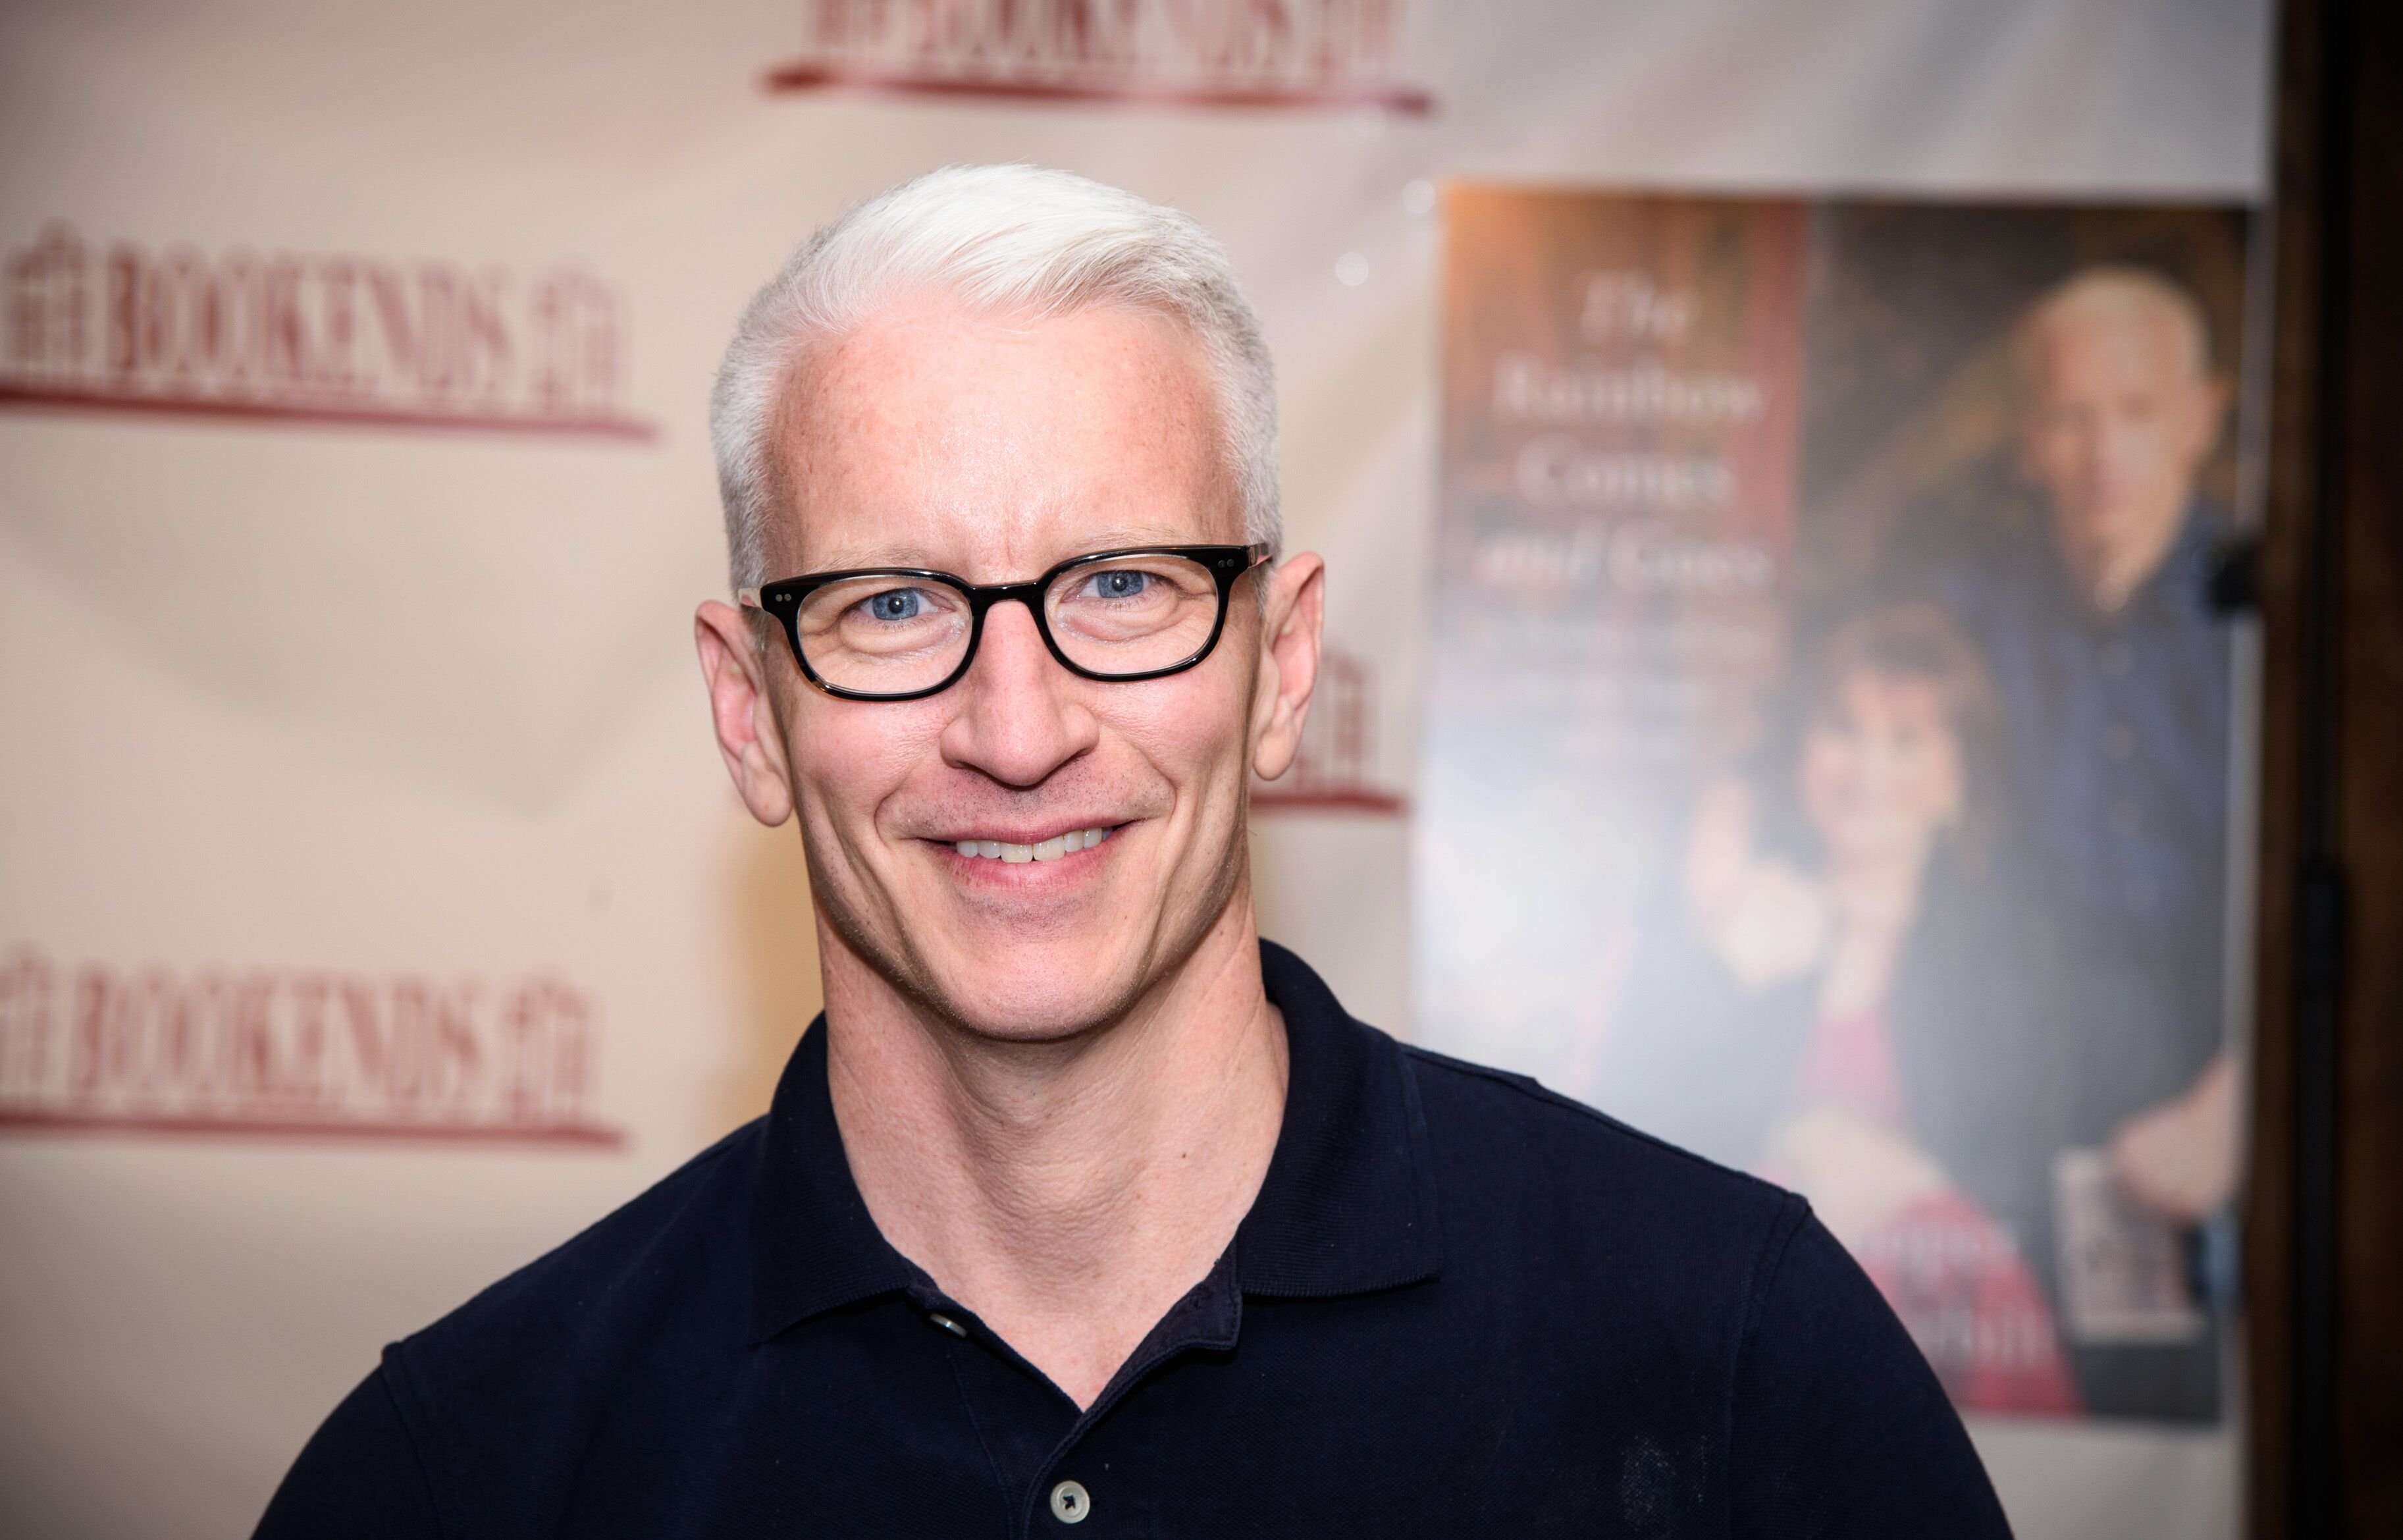 Anderson Cooper at the signing of his book at Bookends Bookstore on April 24, 2016 in Ridgewood, New Jersey | Photo: Getty images